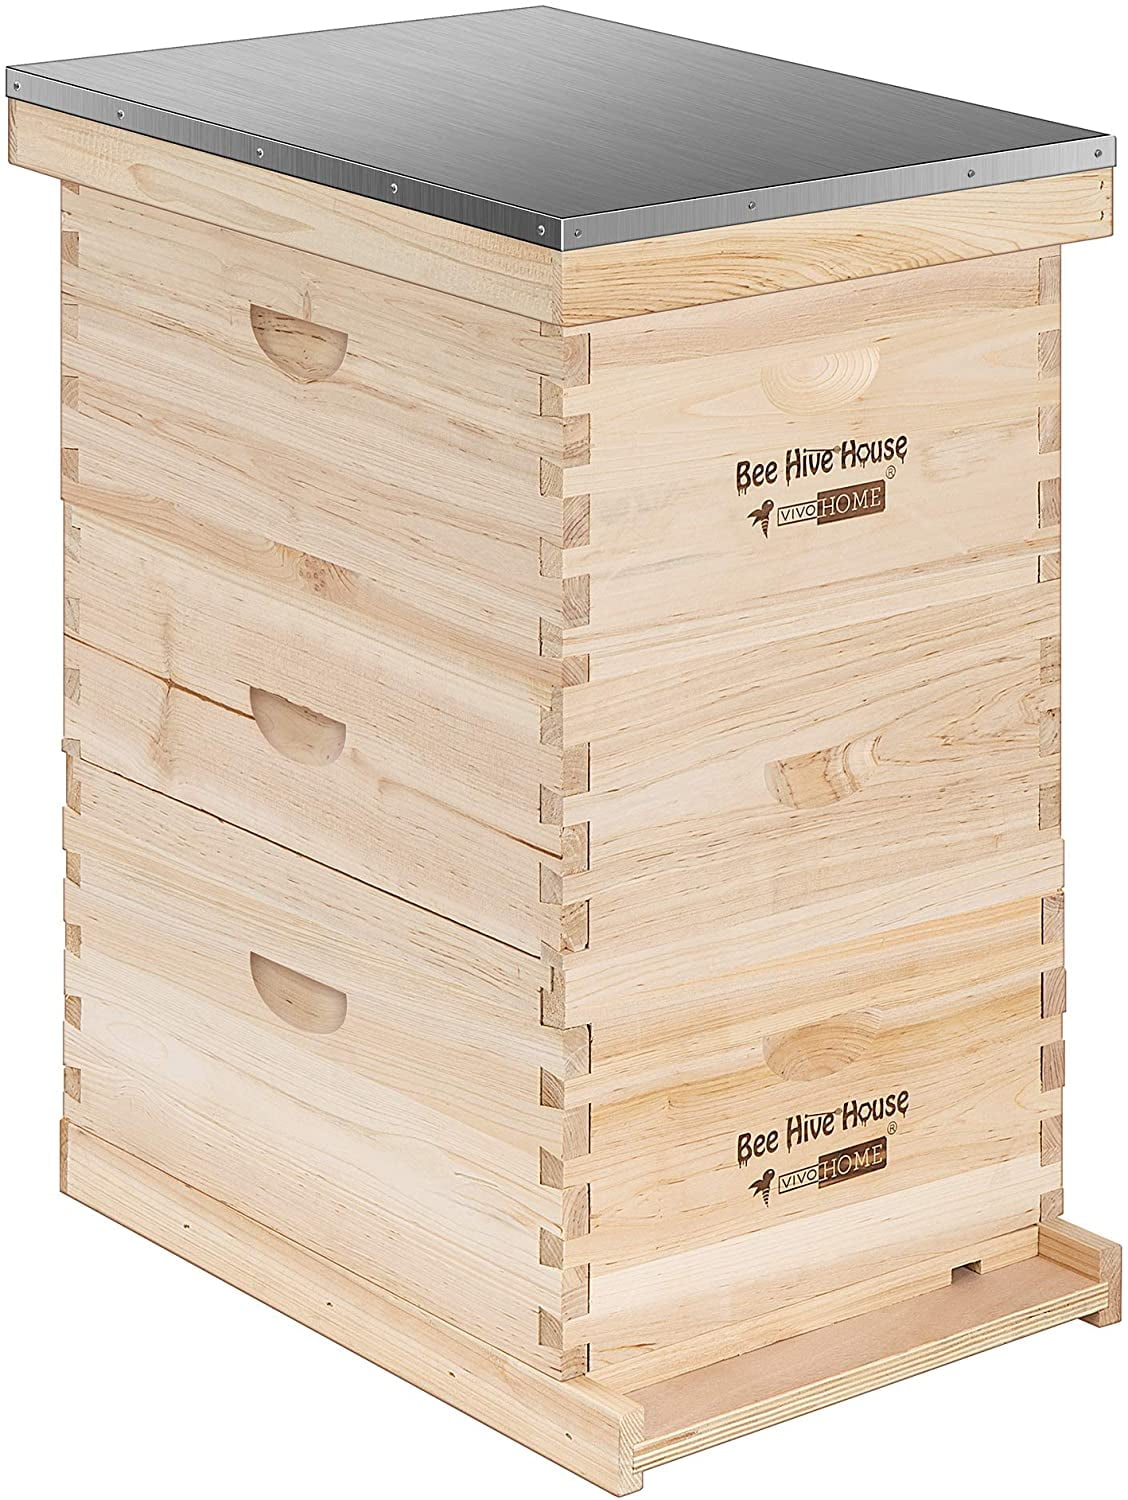 Happybuy Langstroth Bee Hive 4 Layer Langstroth Box 20 Frame Beehive Frames 2 Brood Box 2 Super Box Langstroth Beehive Kit